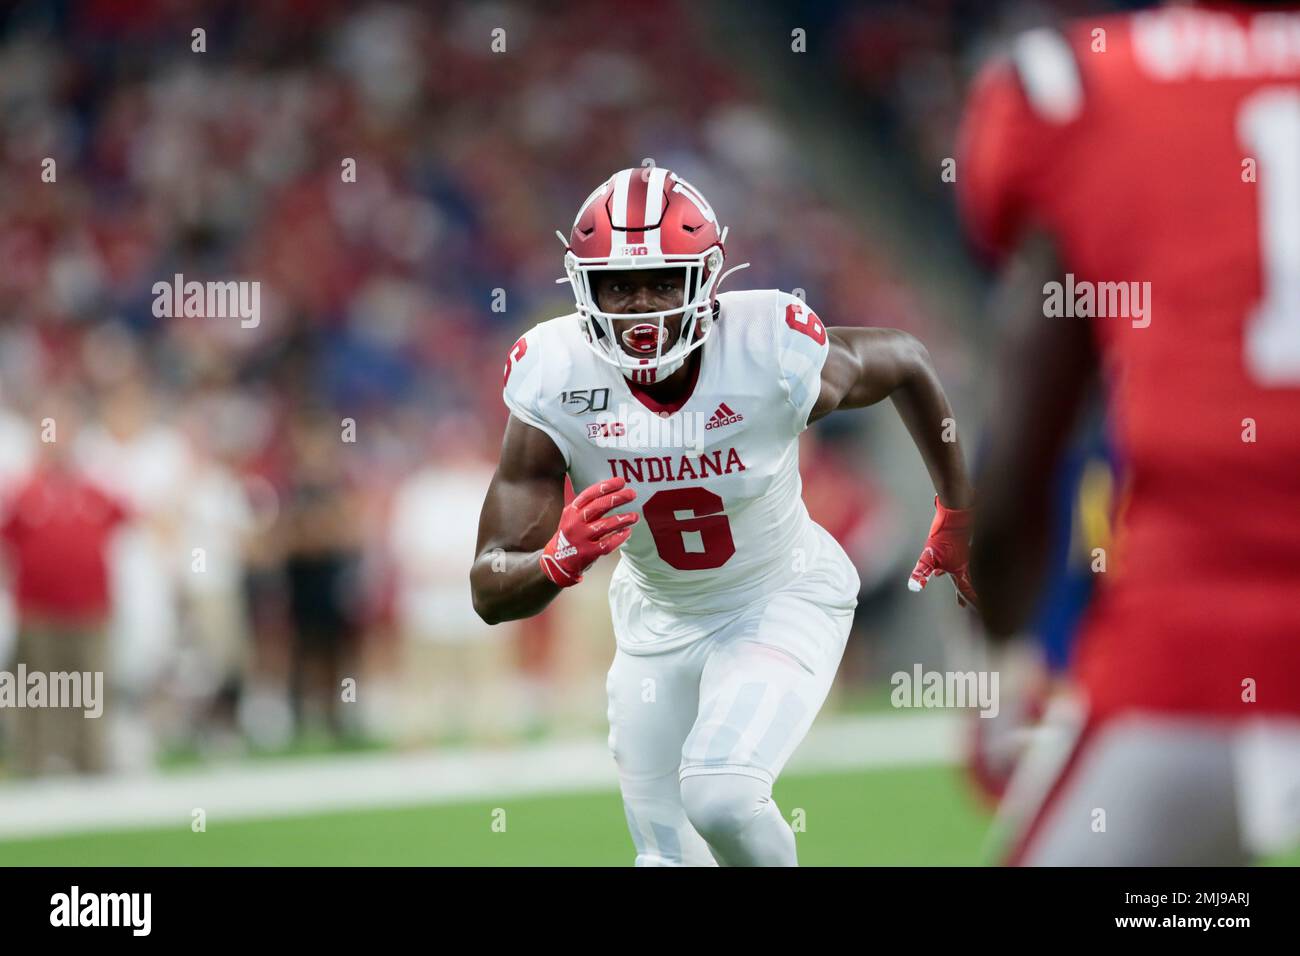 Indiana wide receiver Donavan Hale (6) in action as Indiana played Ball  State during an NCAA football game on Saturday, Aug. 31, 2019 in  Indianapolis. (AP Photo/AJ Mast Stock Photo - Alamy